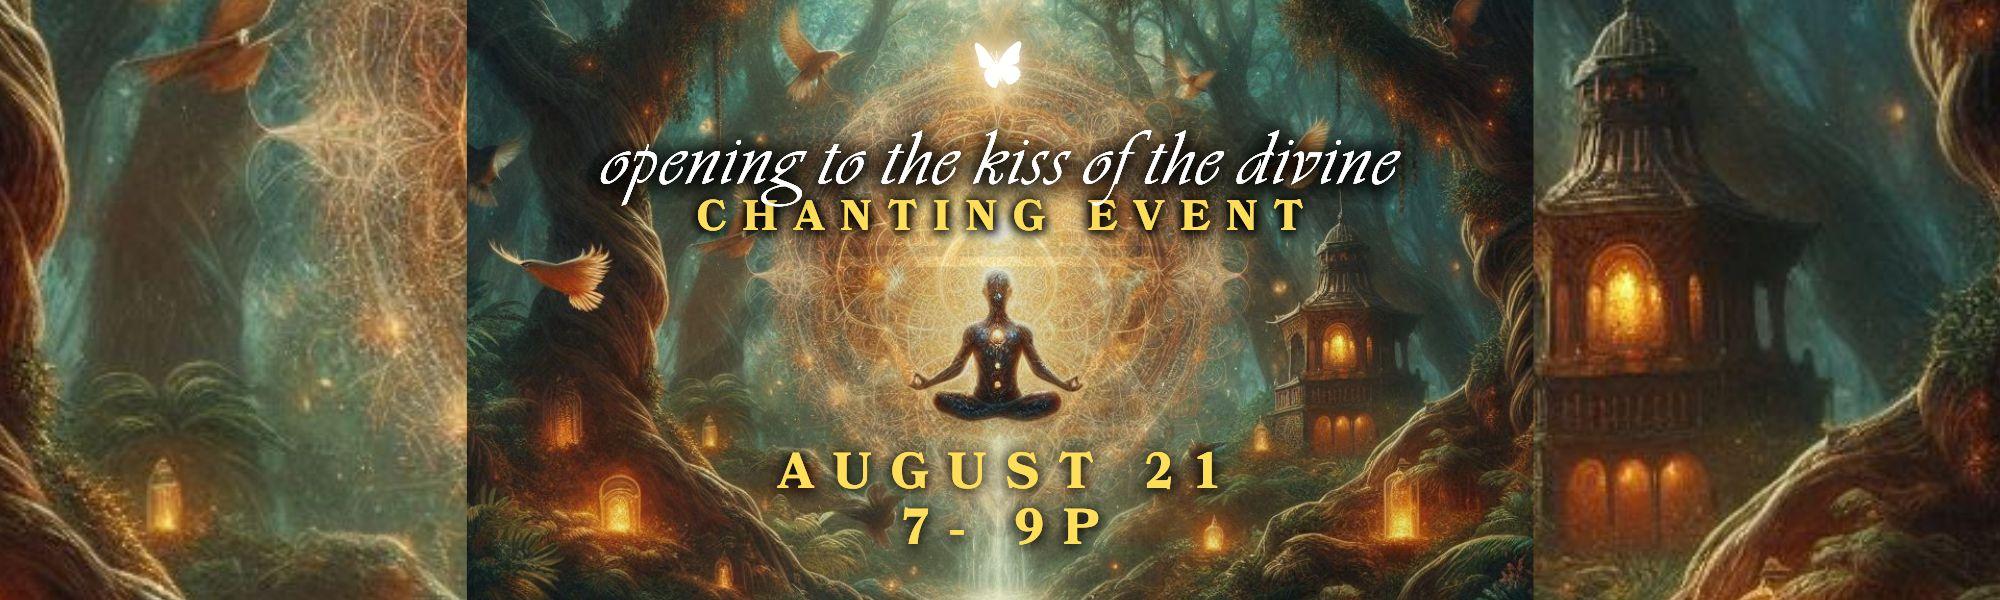 Chanting Event, August 21 7-9pm